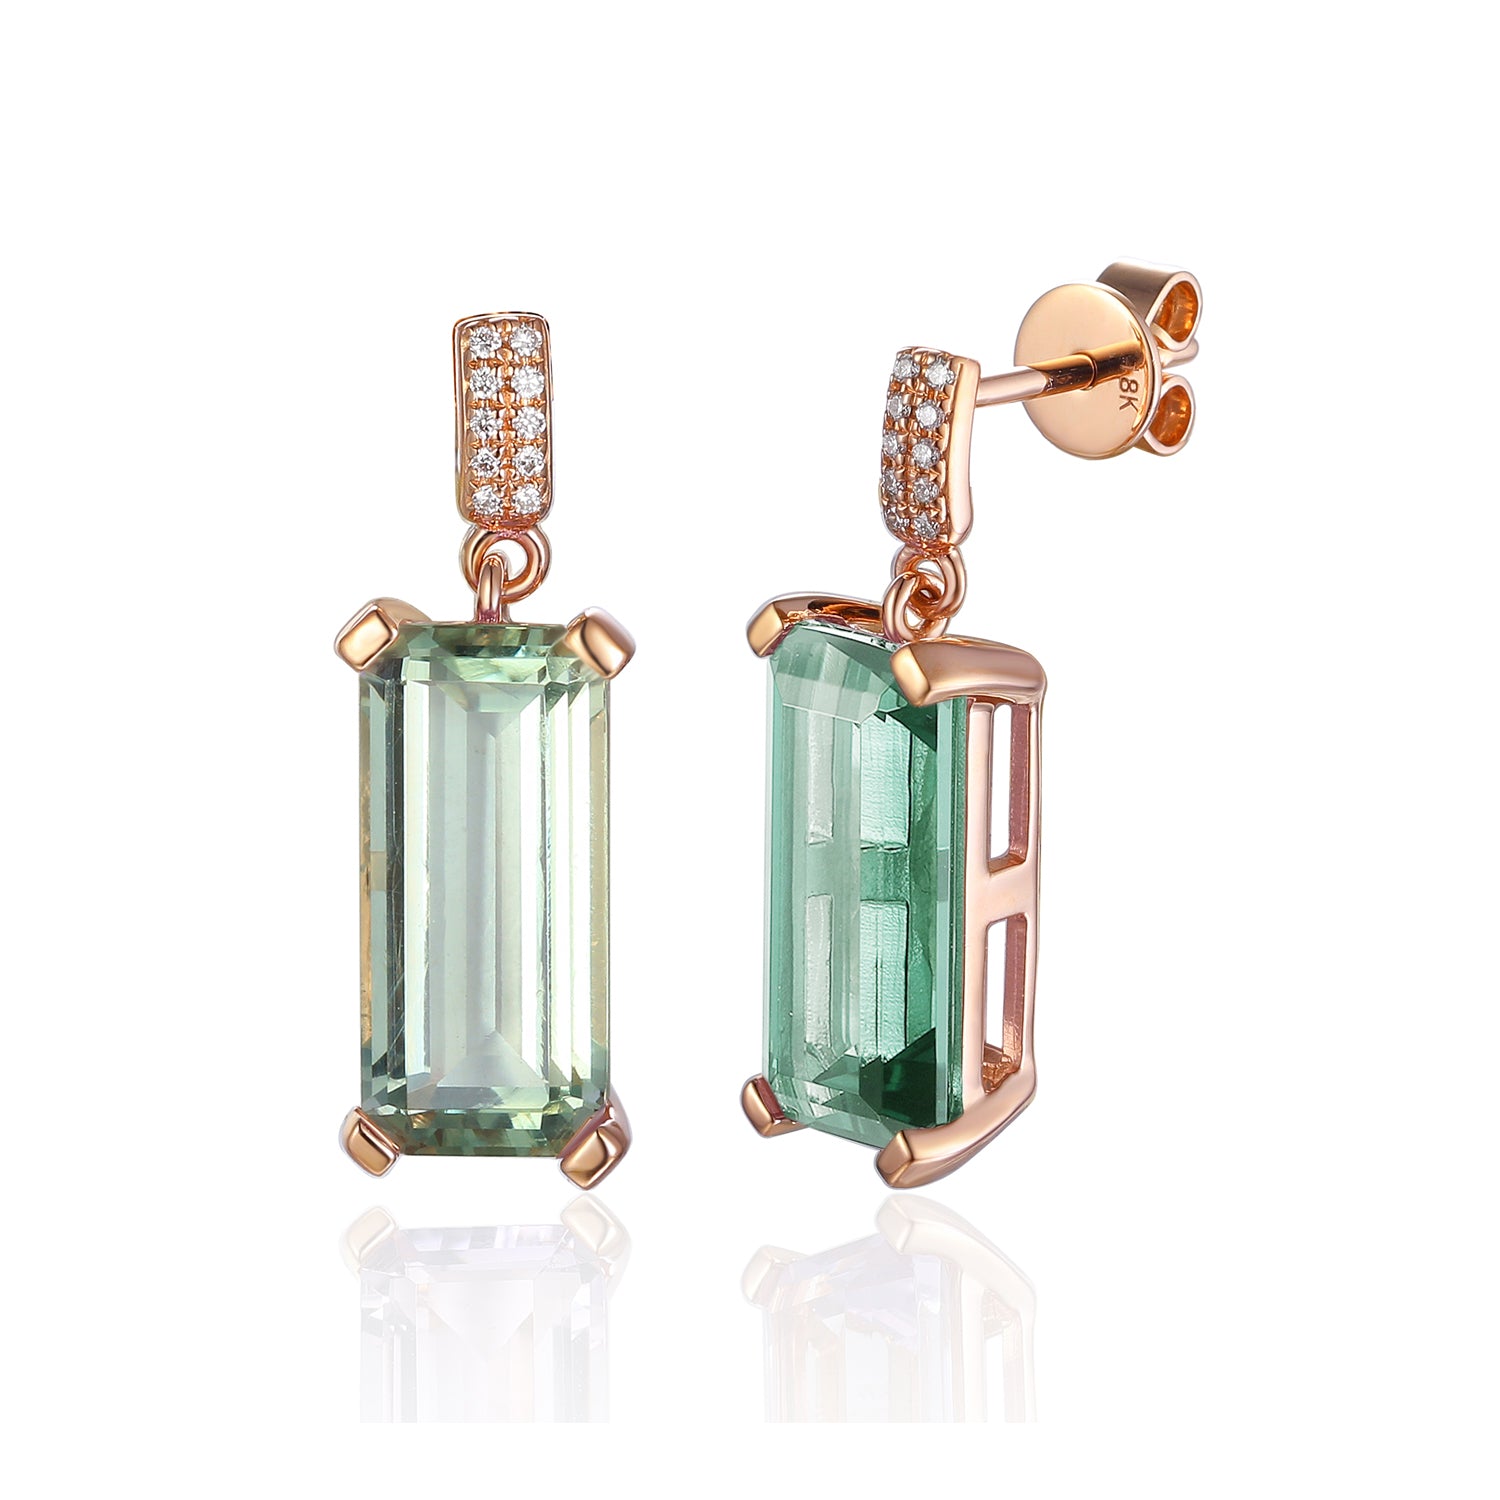 Long octagon Gemstone Earrings with Pave Diamond Drop